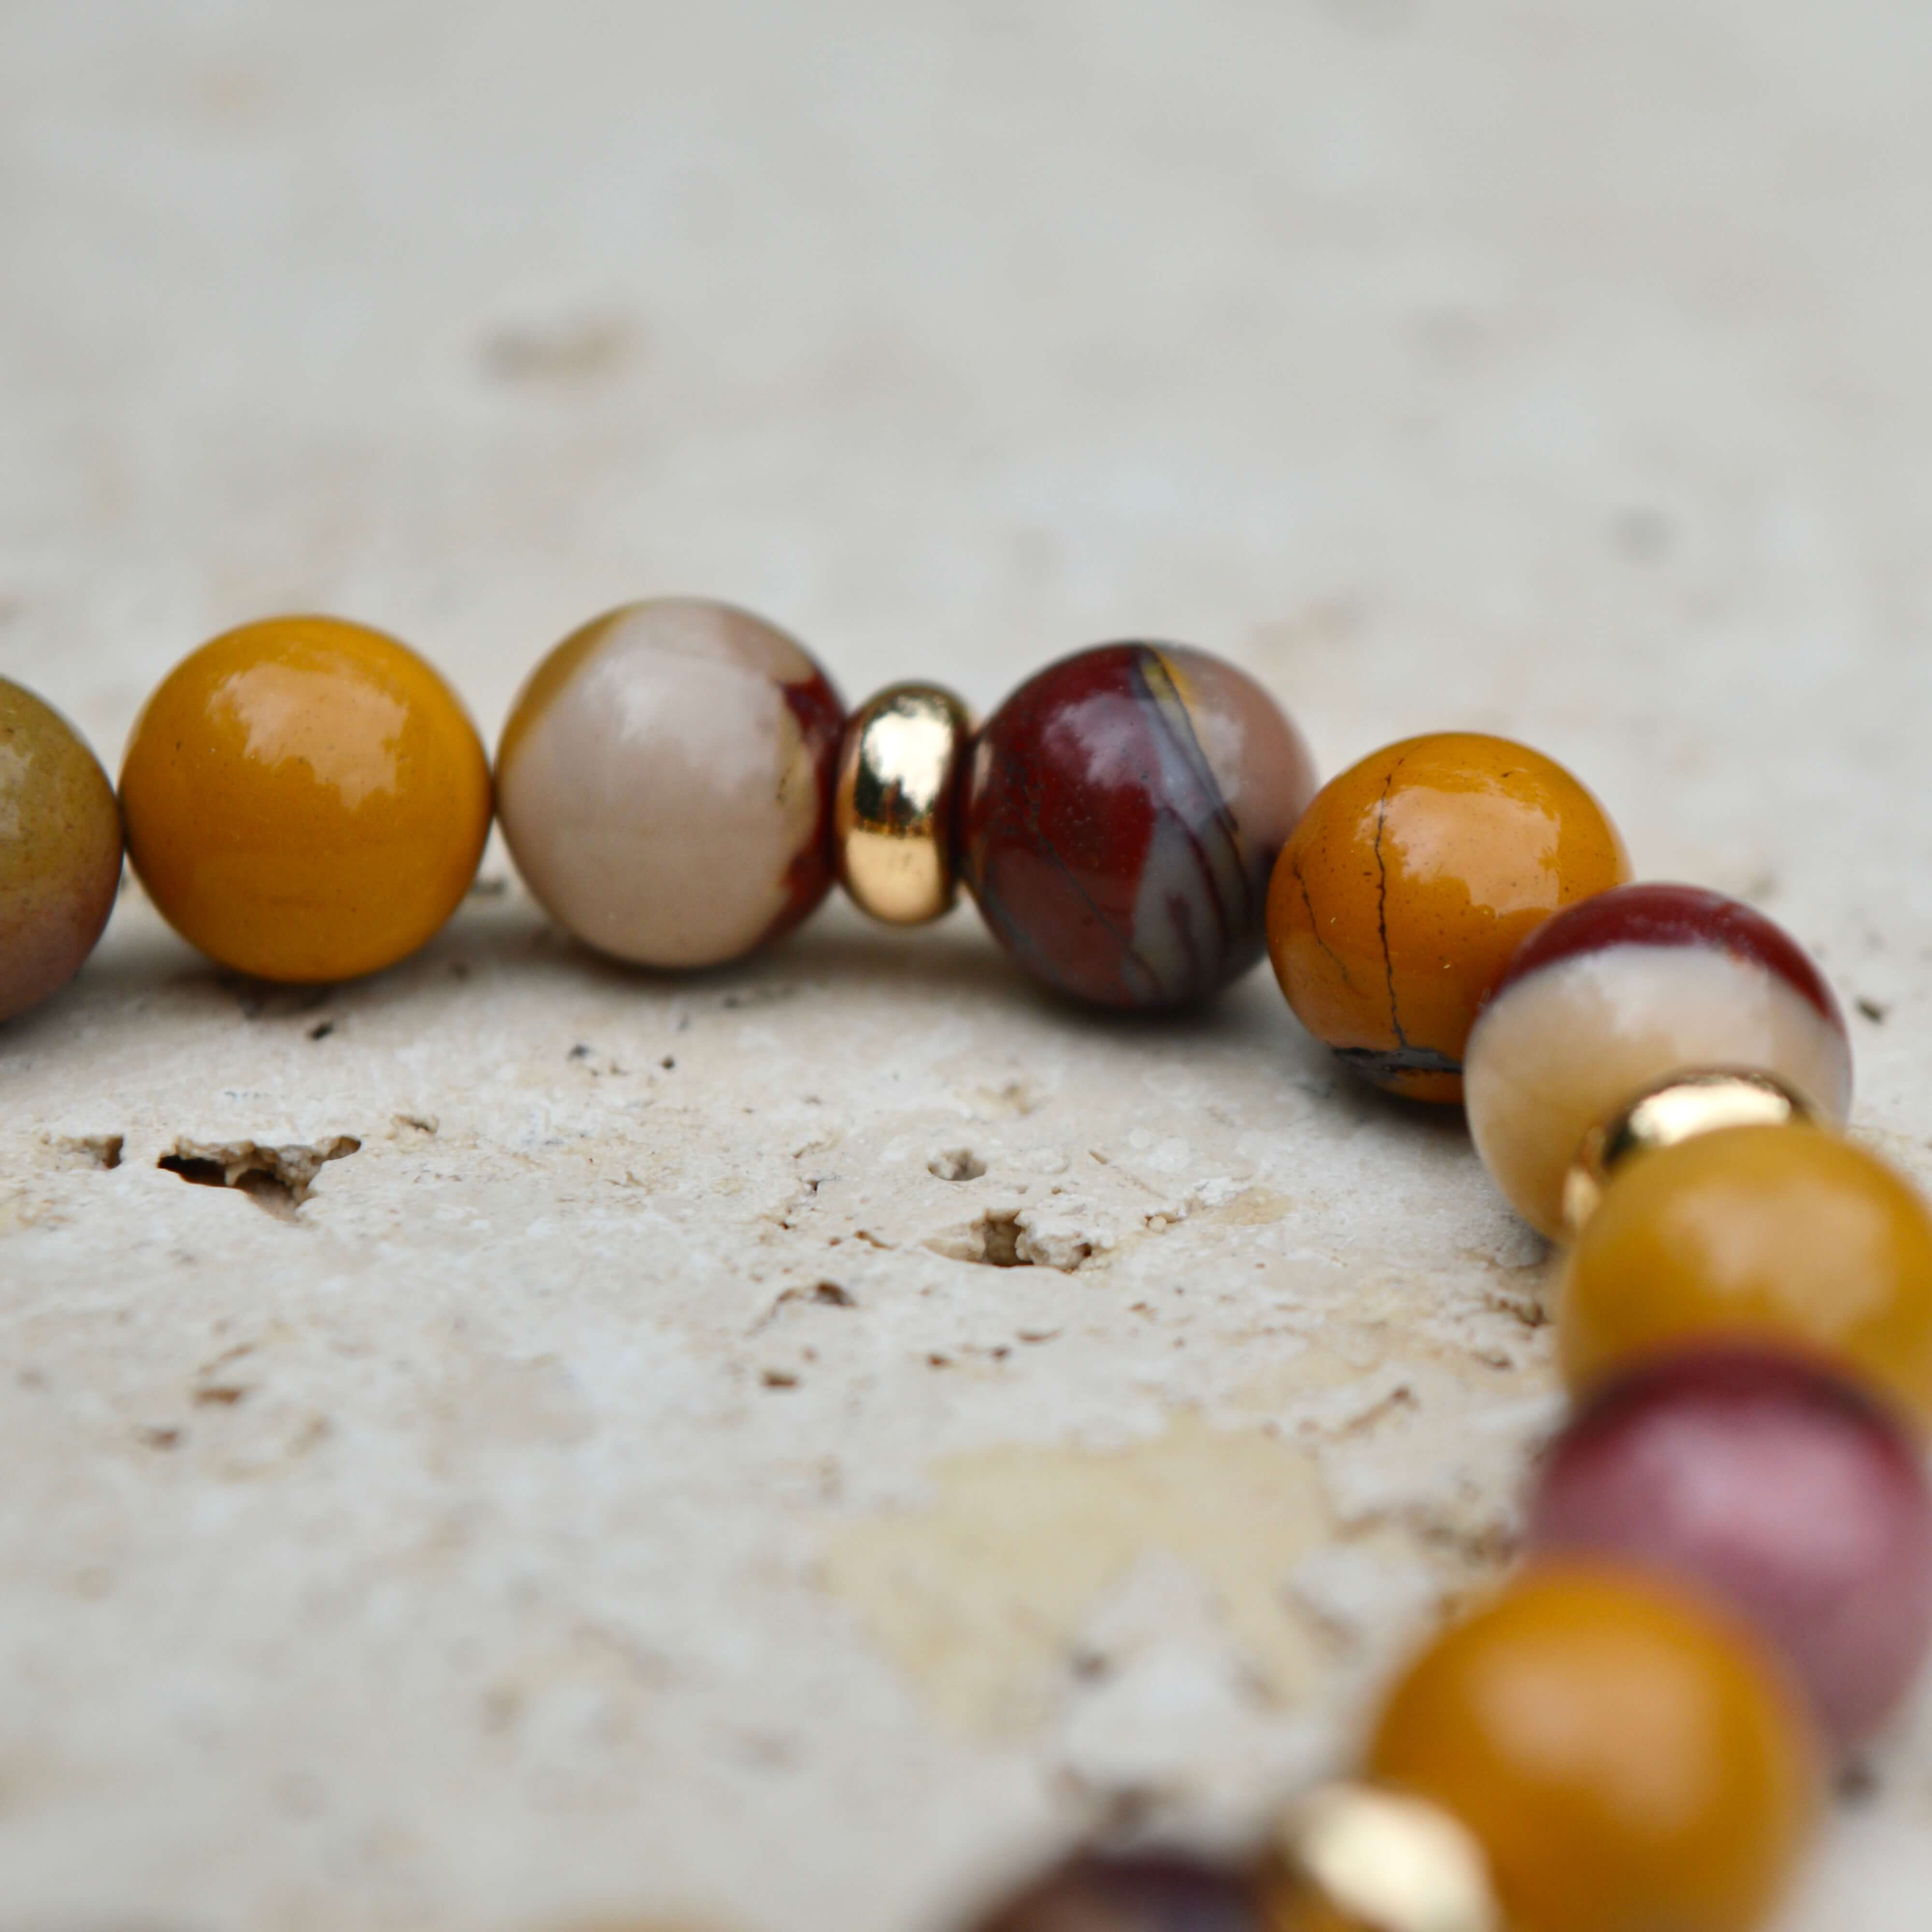 MOOKAITE & GOLD BEADED BRACELET - HALCYON COLLECTION - Headless Nation